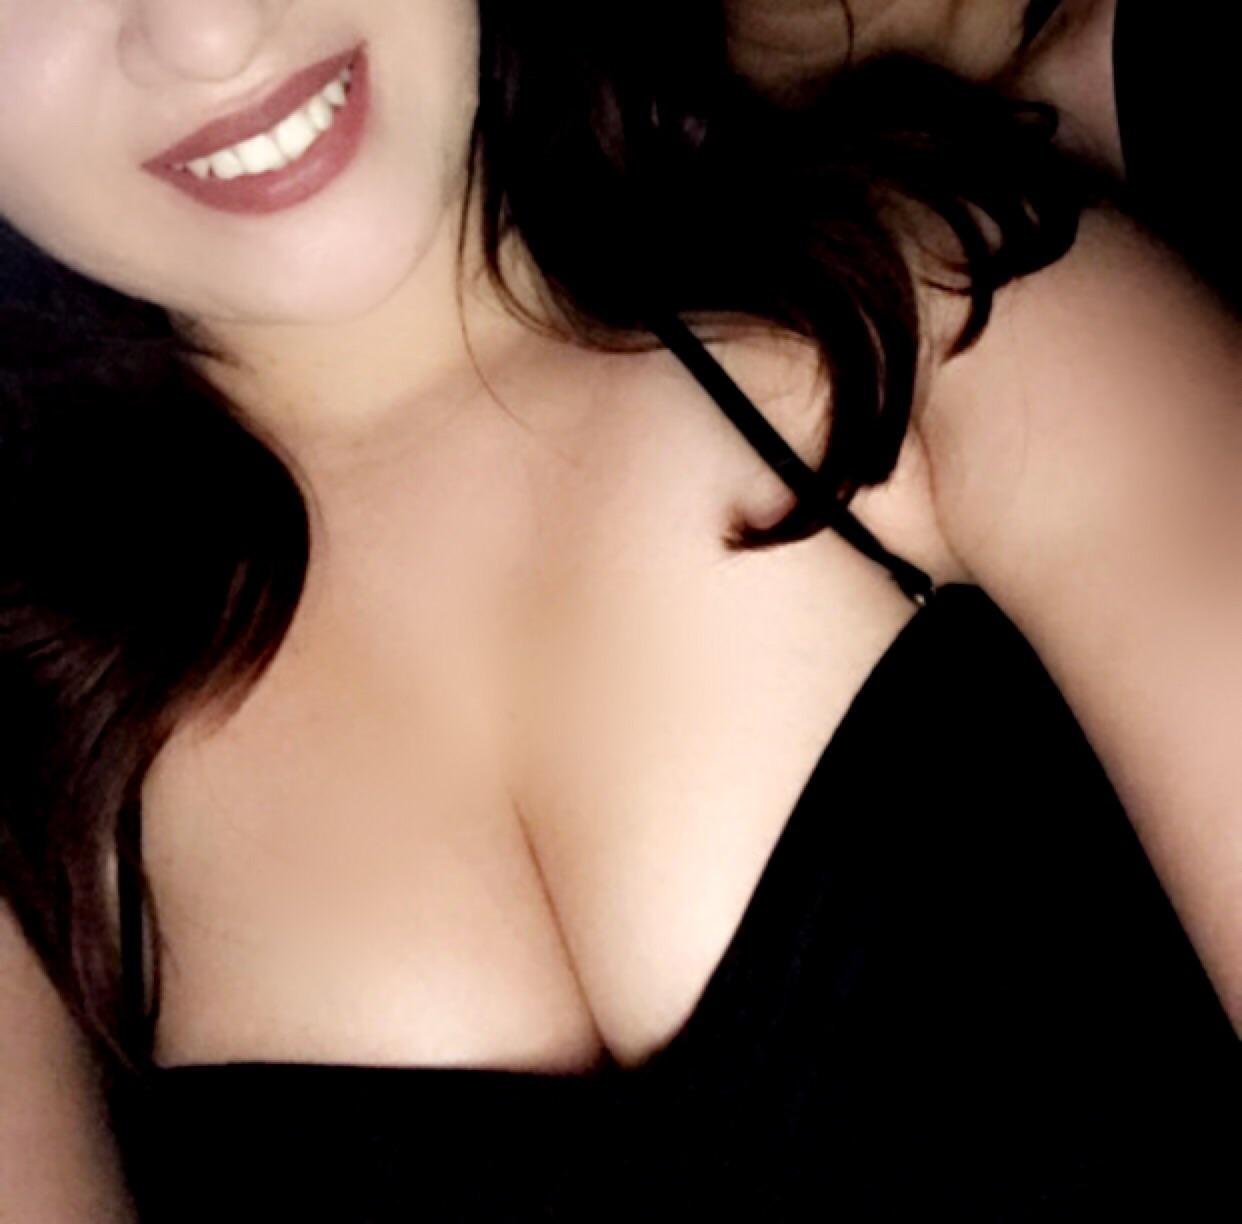 Would you stare at her boobs if you seen her ? Curious to know :)